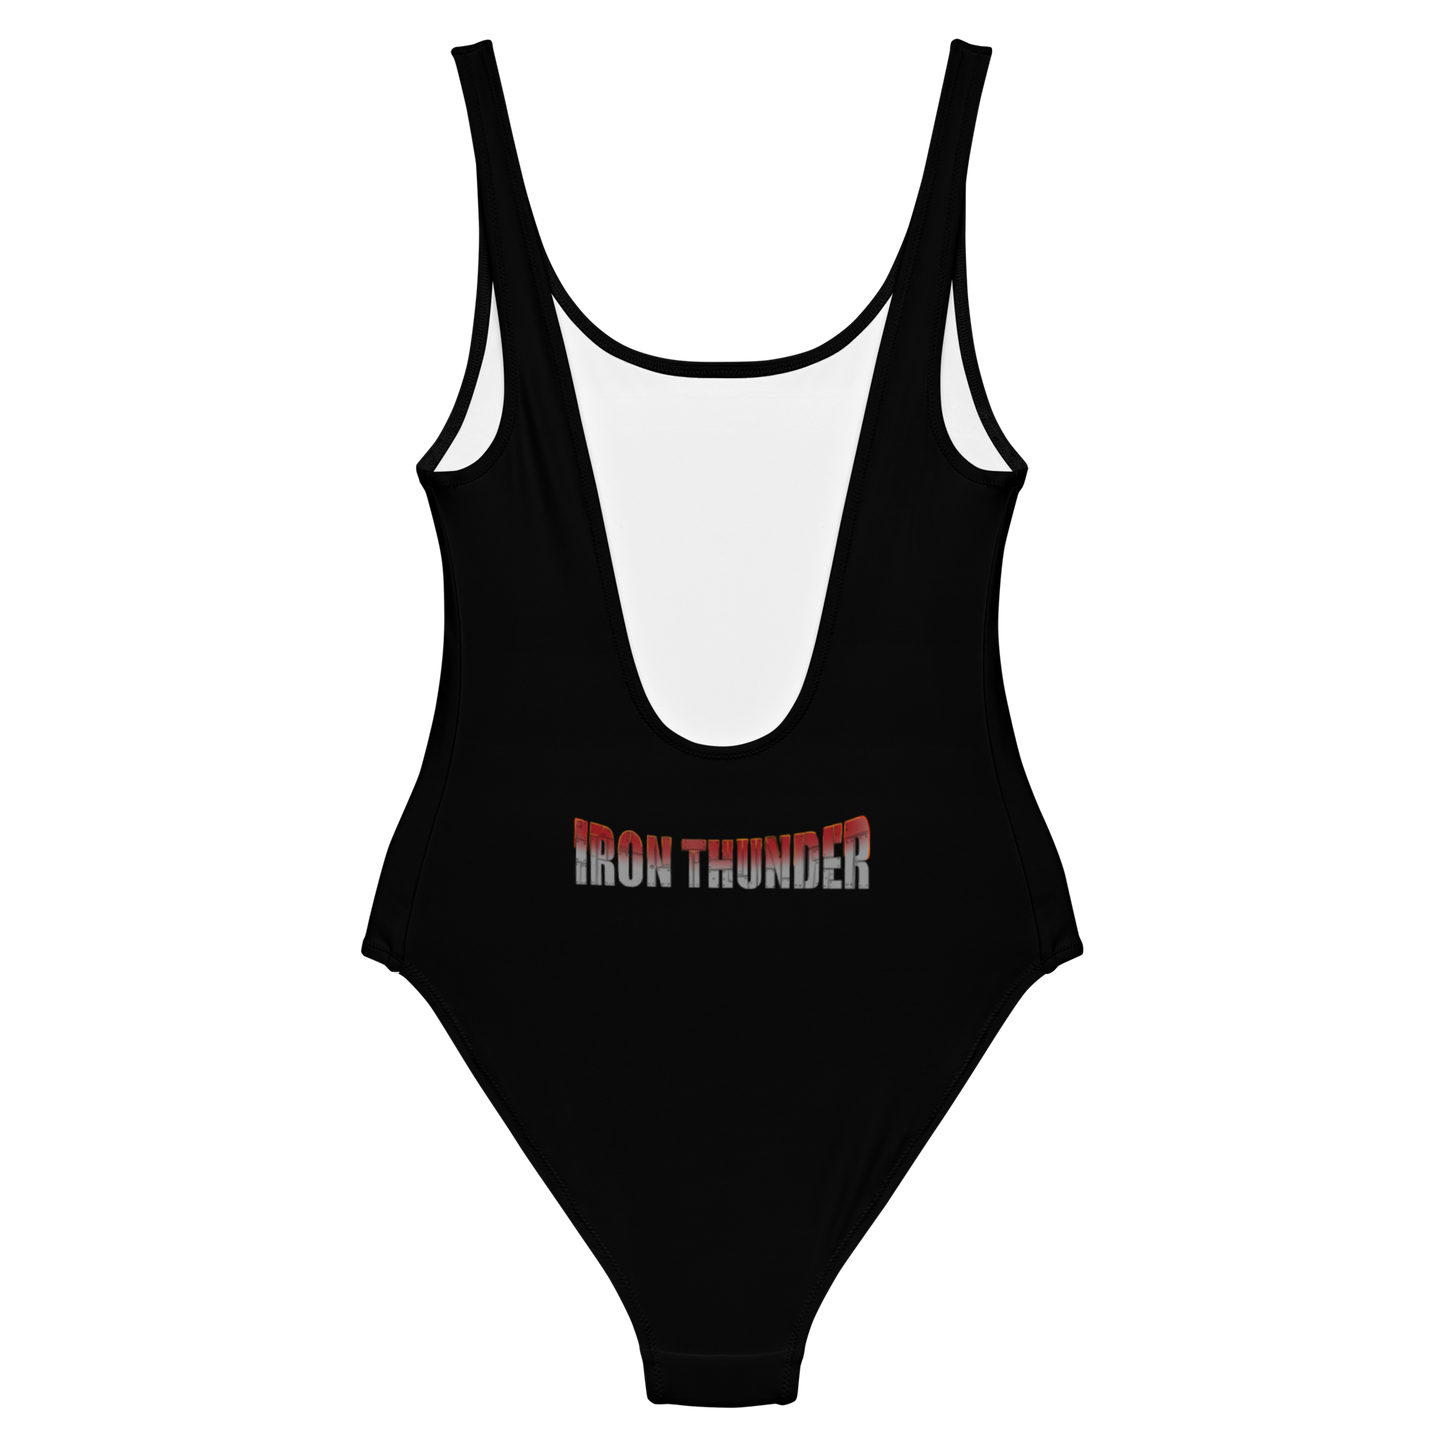 Imperium Iron Thunder official one piece swimsuit by Metal Mistress